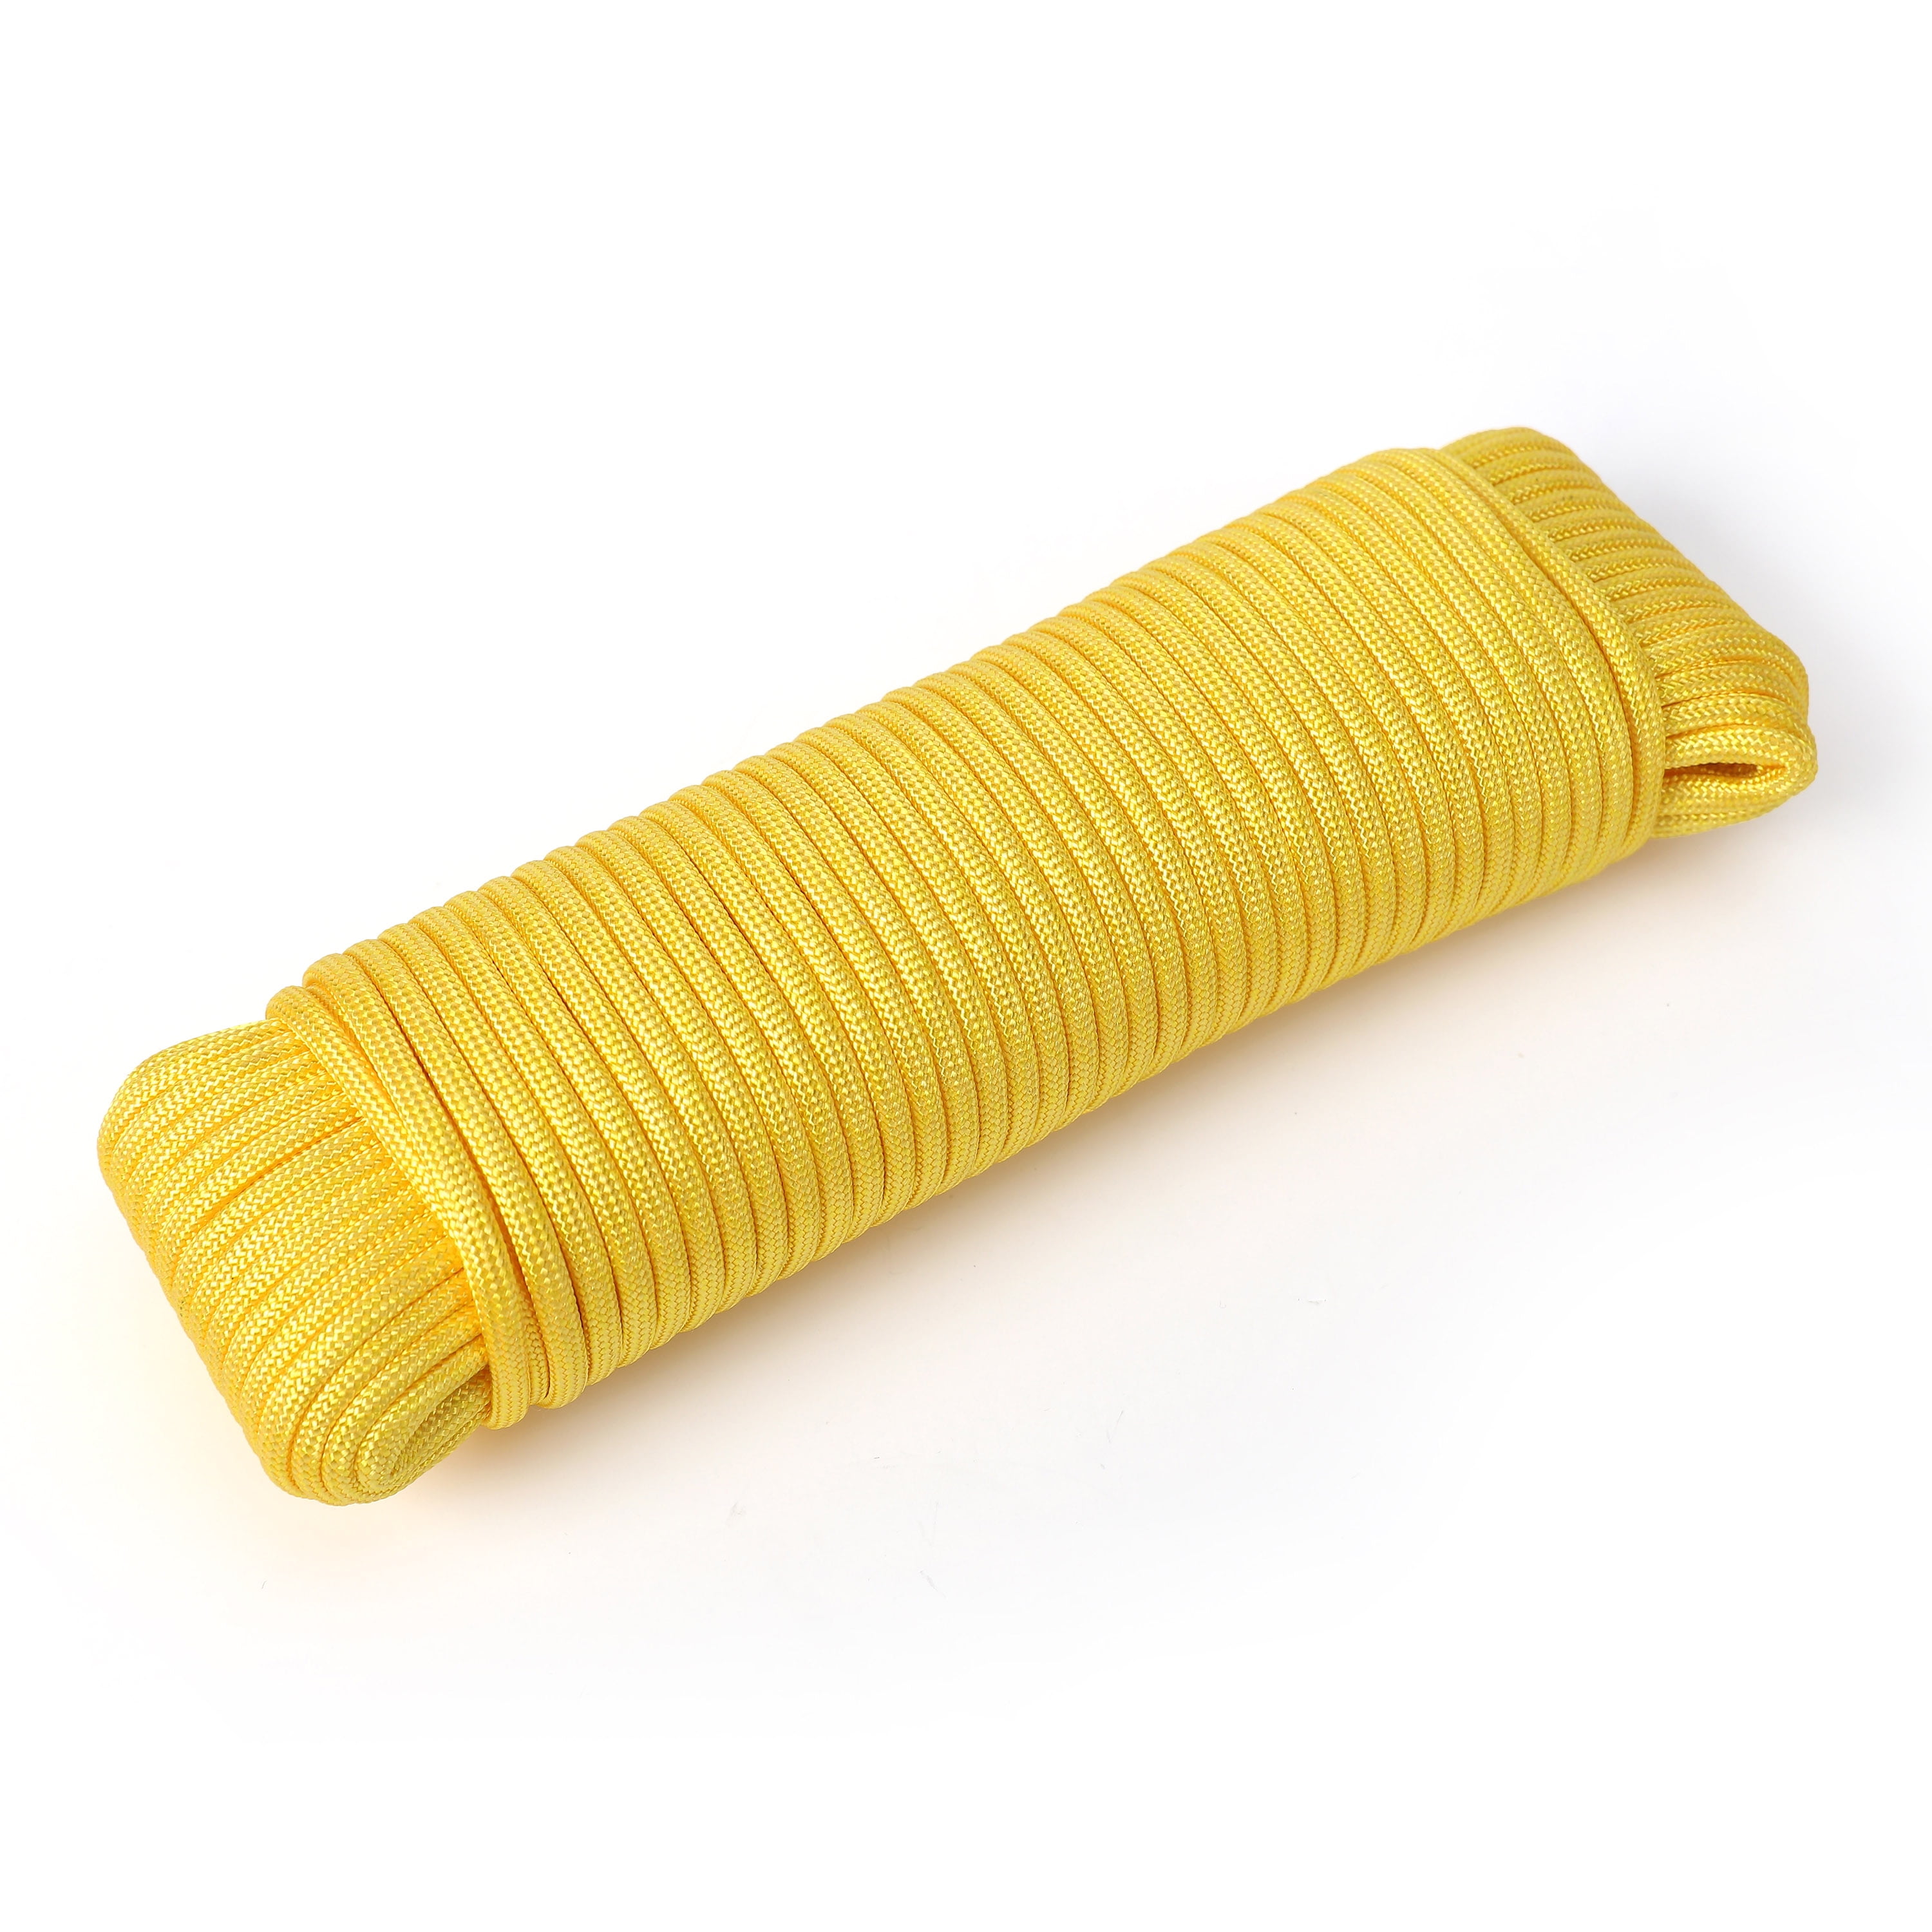 Ozark Trail Model 2156 100% Polyester Yellow Paracord - 100 ft